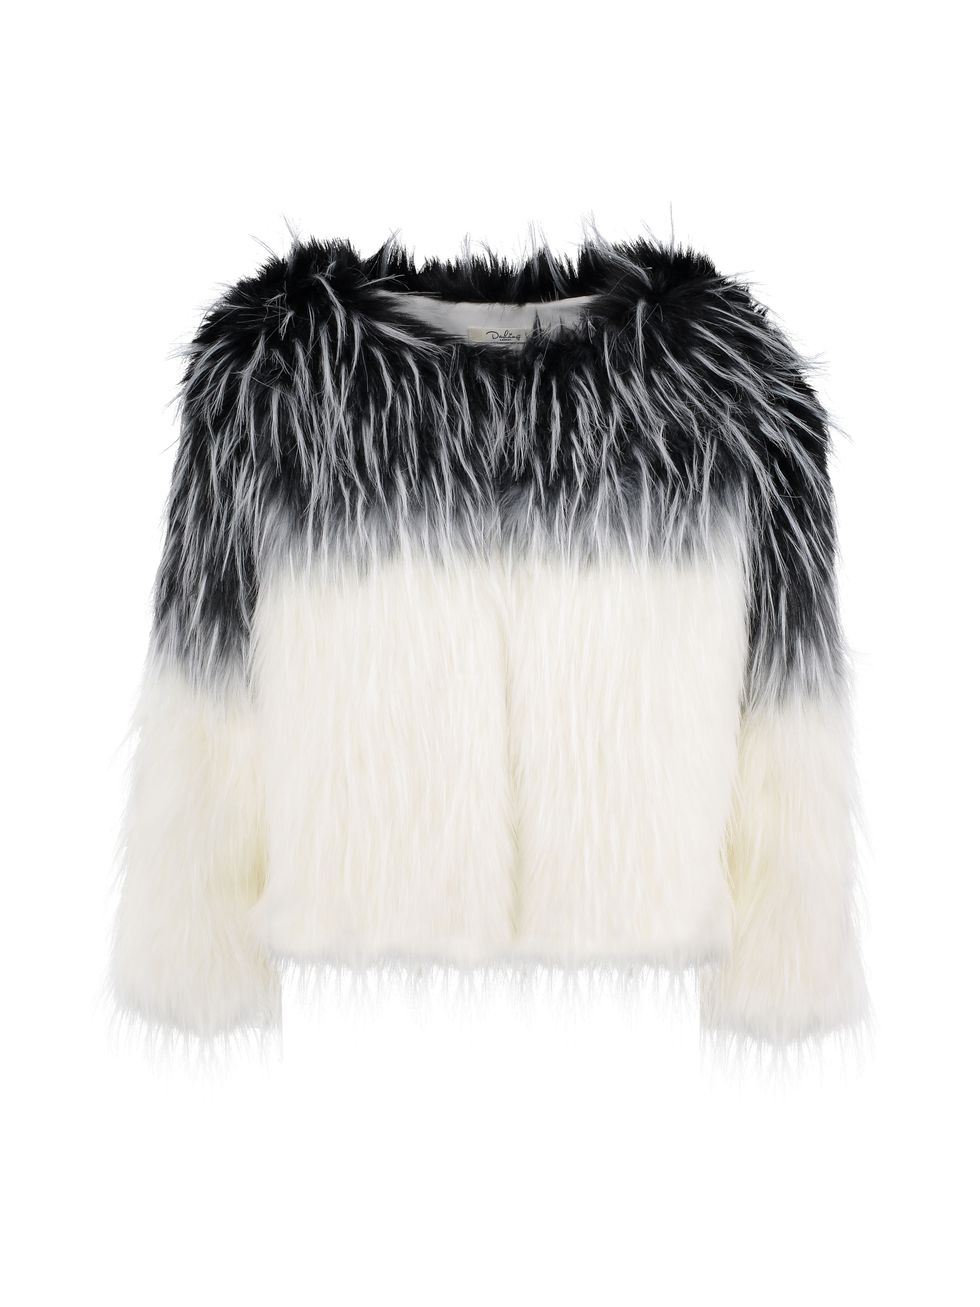 Fur, Clothing, Outerwear, Fur clothing, Textile, Feather, Neck, Natural material, Sleeve, 